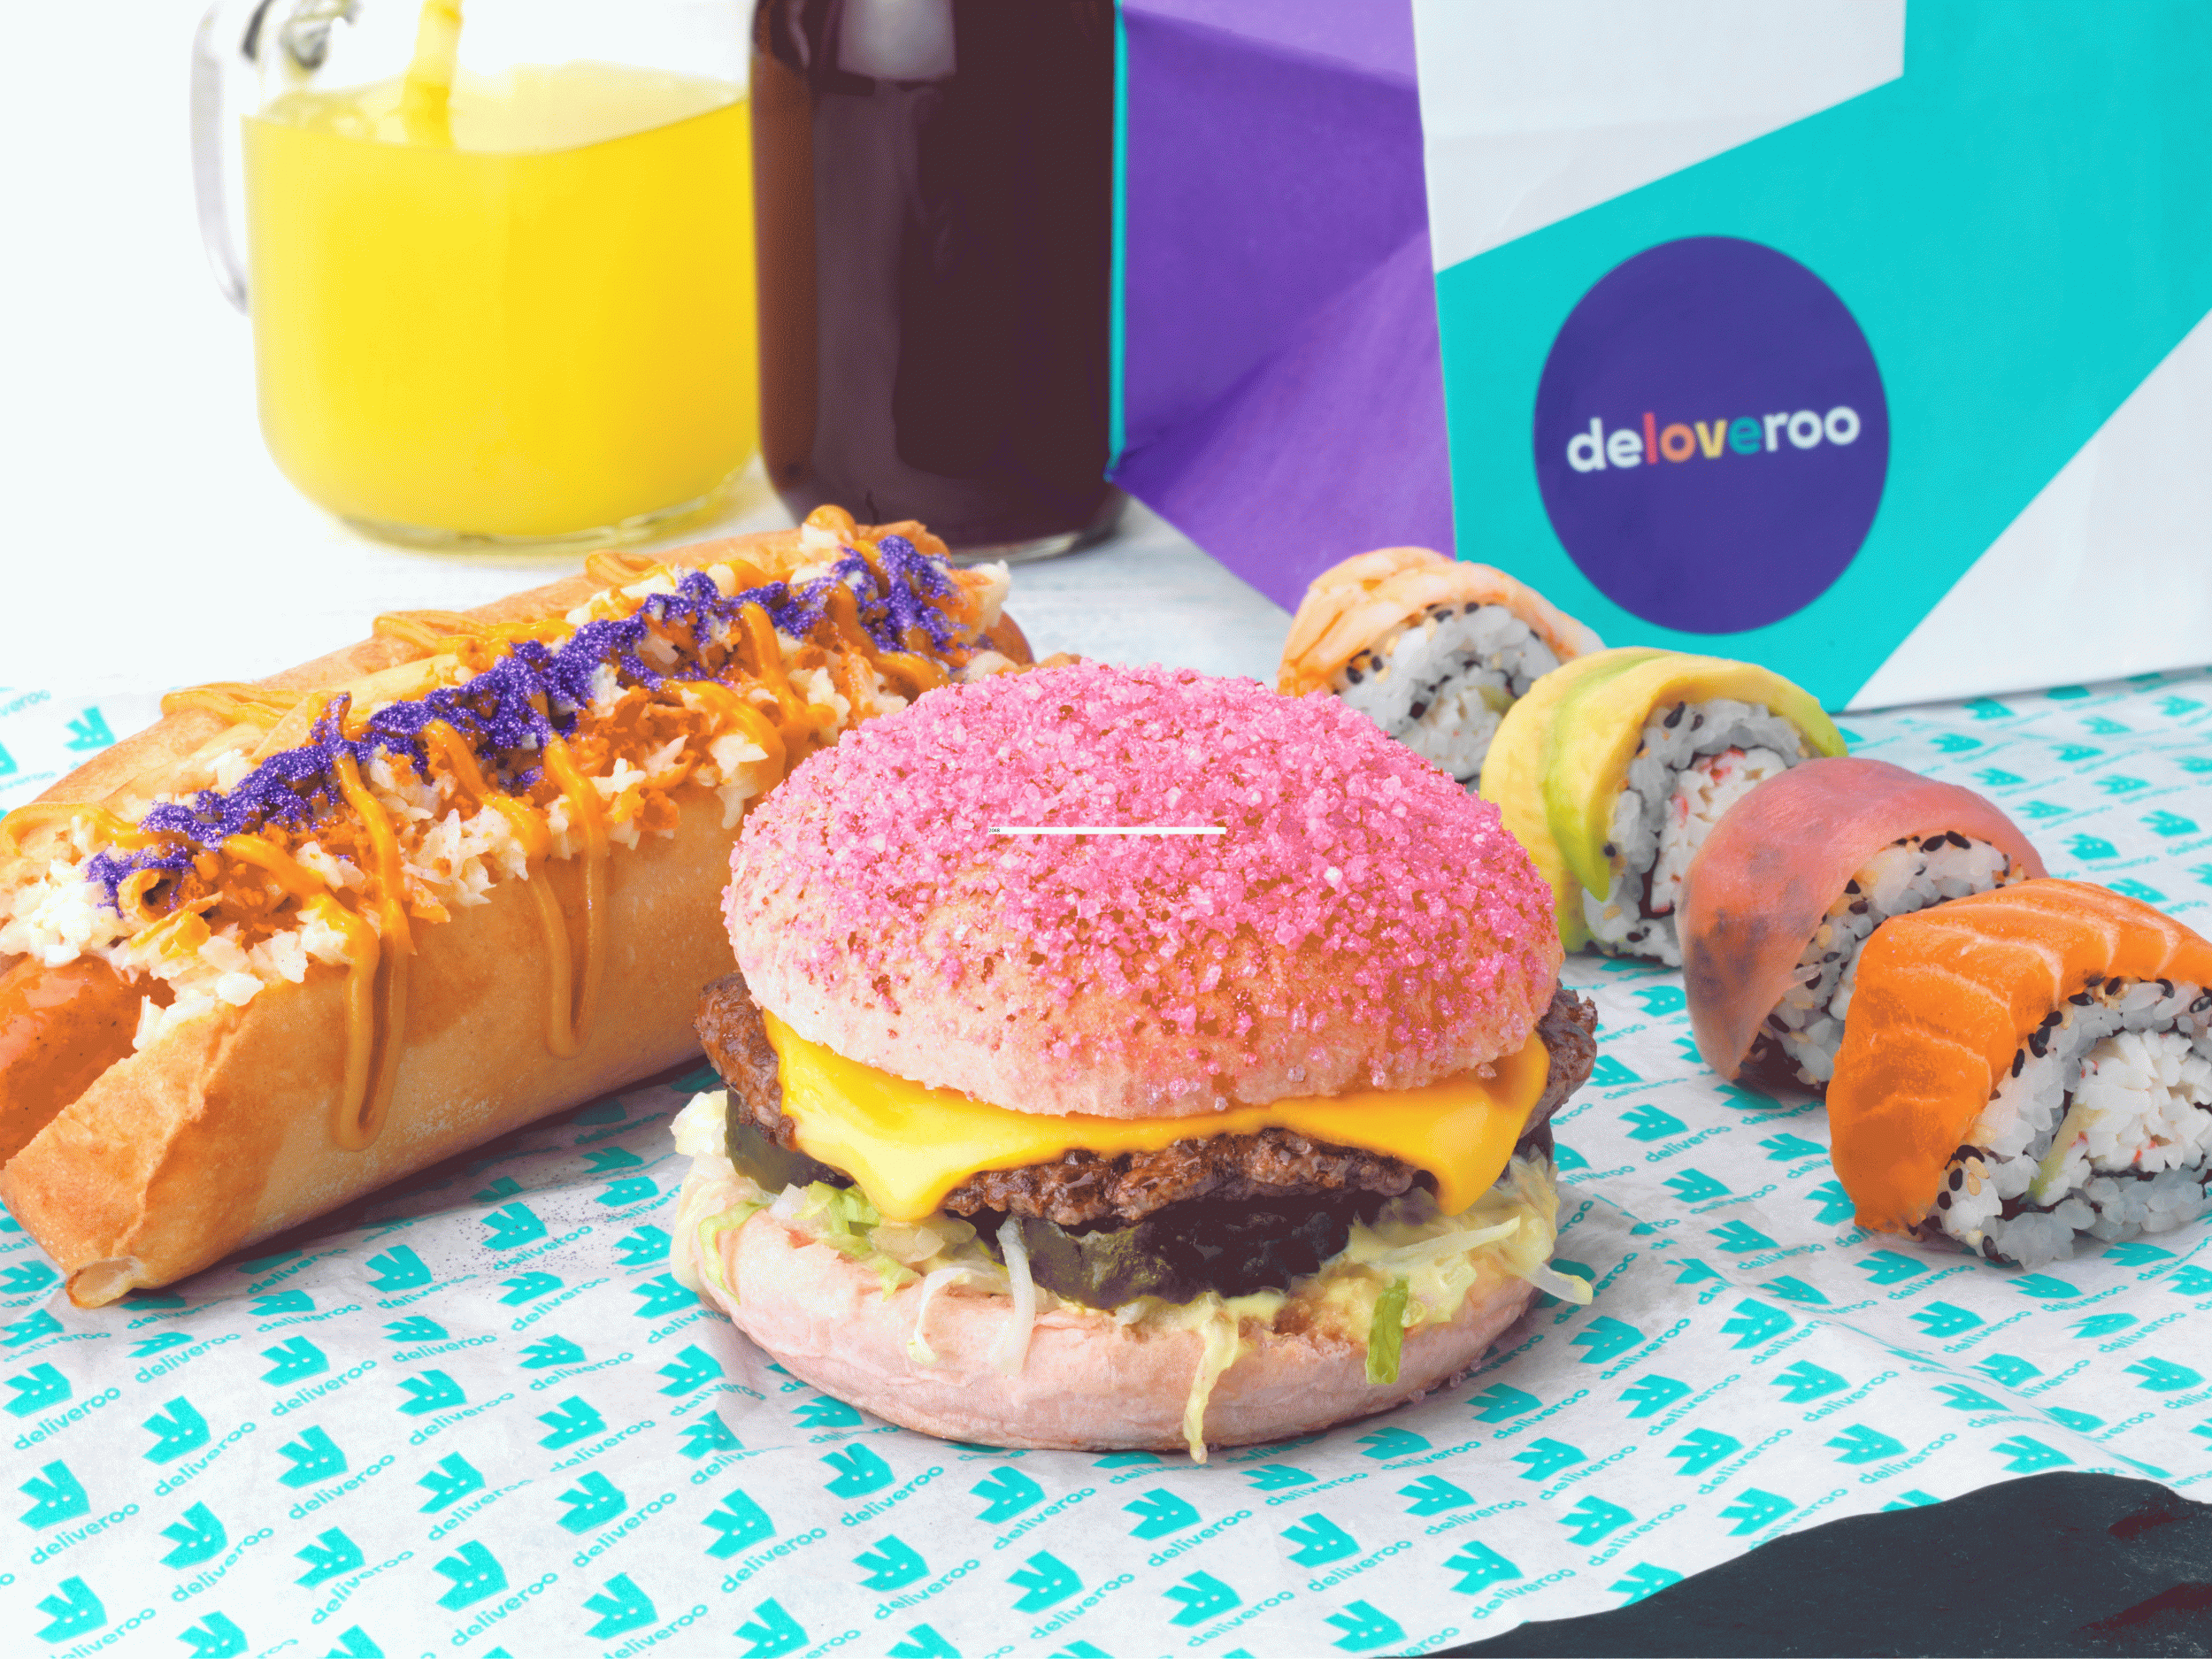 Deliveroo offers rainbow-themed dishes to celebrate London Pride